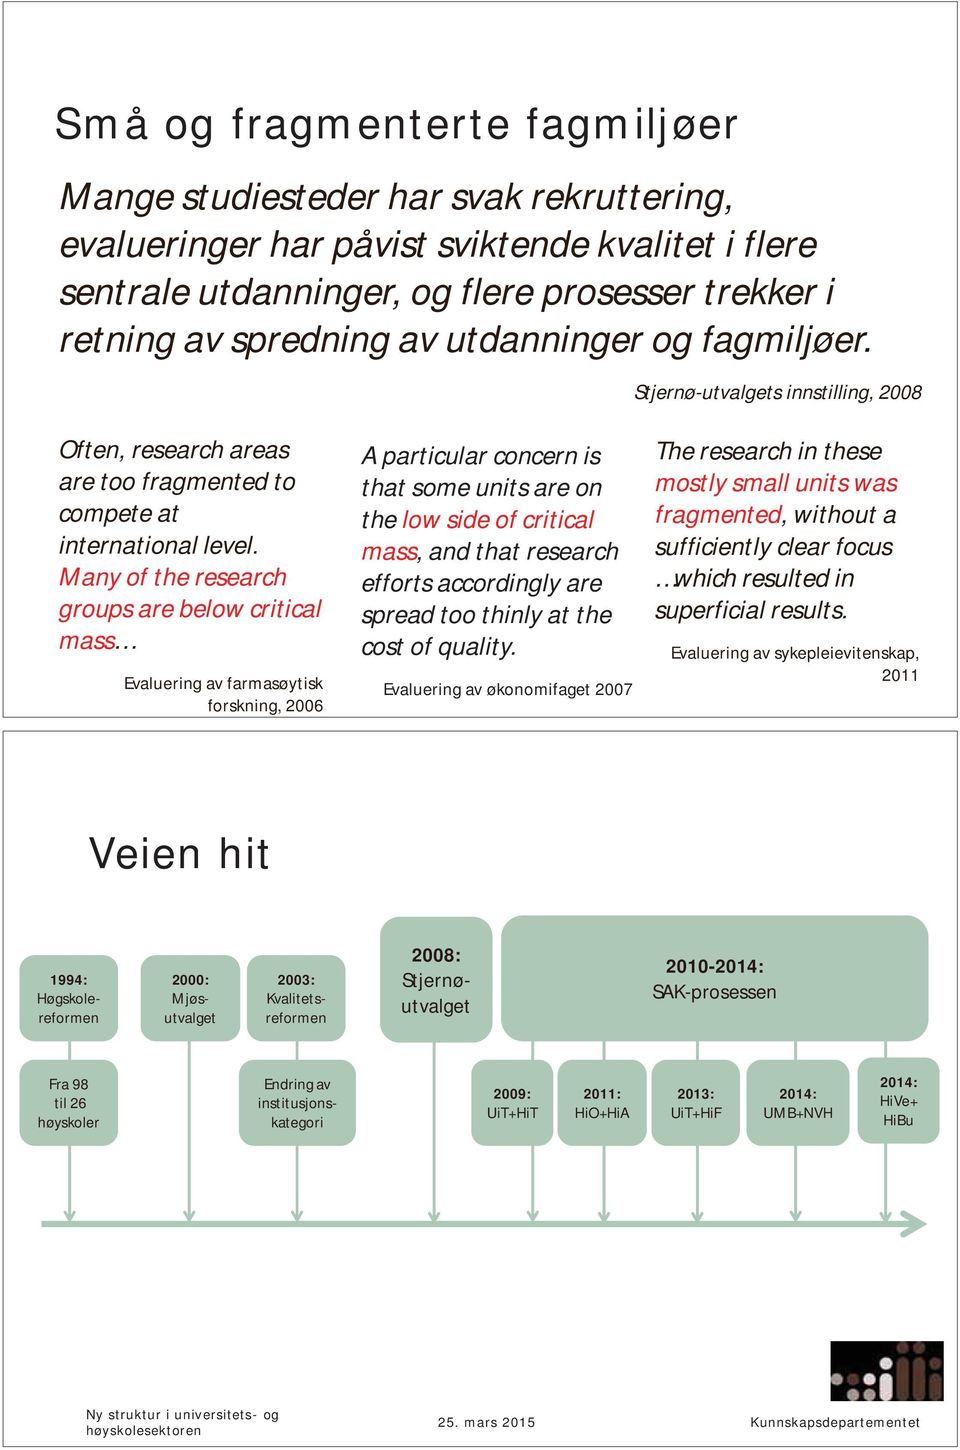 Many of the research groups are below critical mass Evaluering av farmasøytisk forskning, 2006 A particular concern is that some units are on the low side of critical mass, and that research efforts